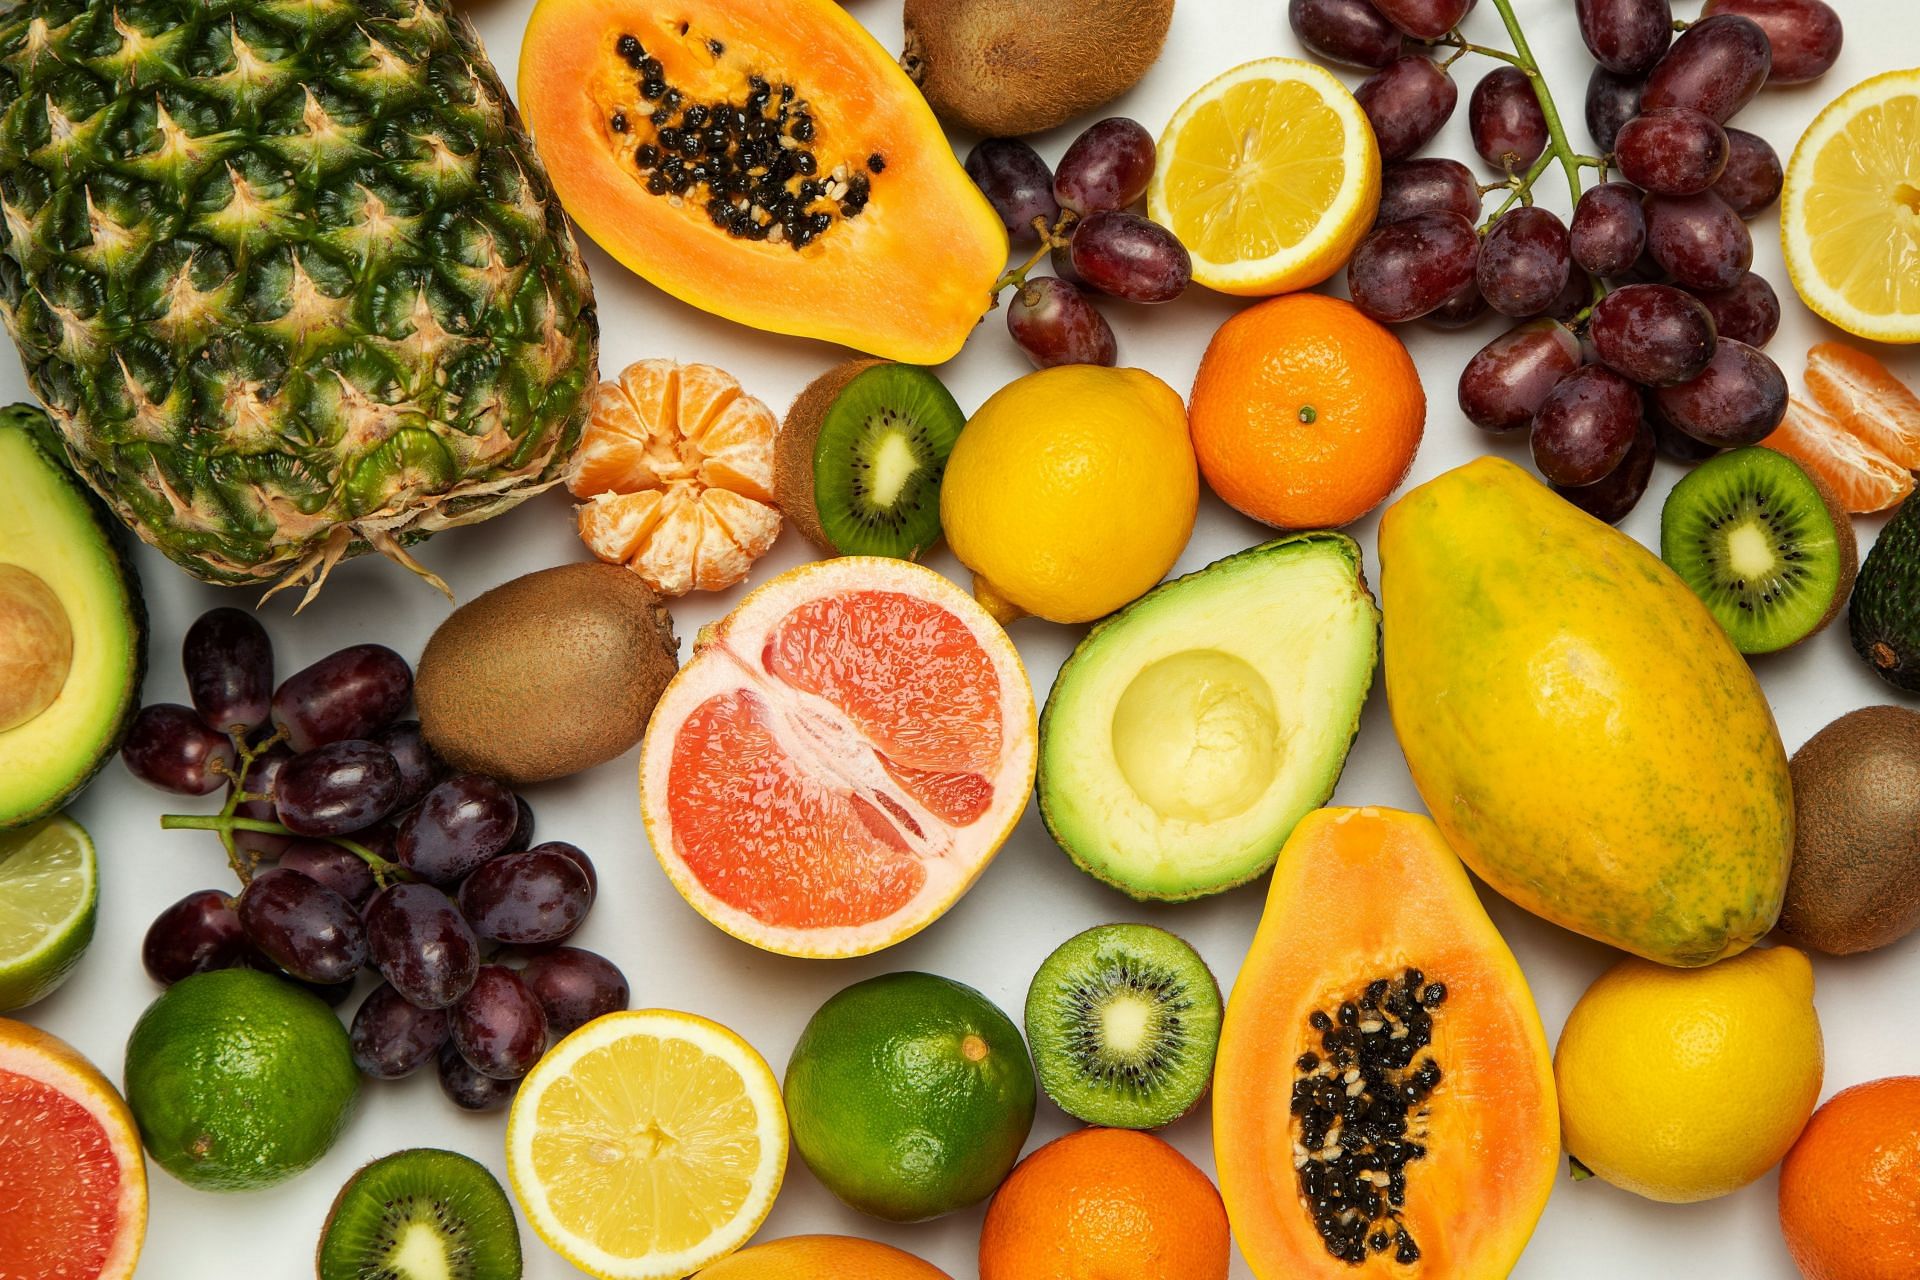 Fruits are one of the best ways to remove toxins from the body. (Image via Unsplash/Julia Zolotova)